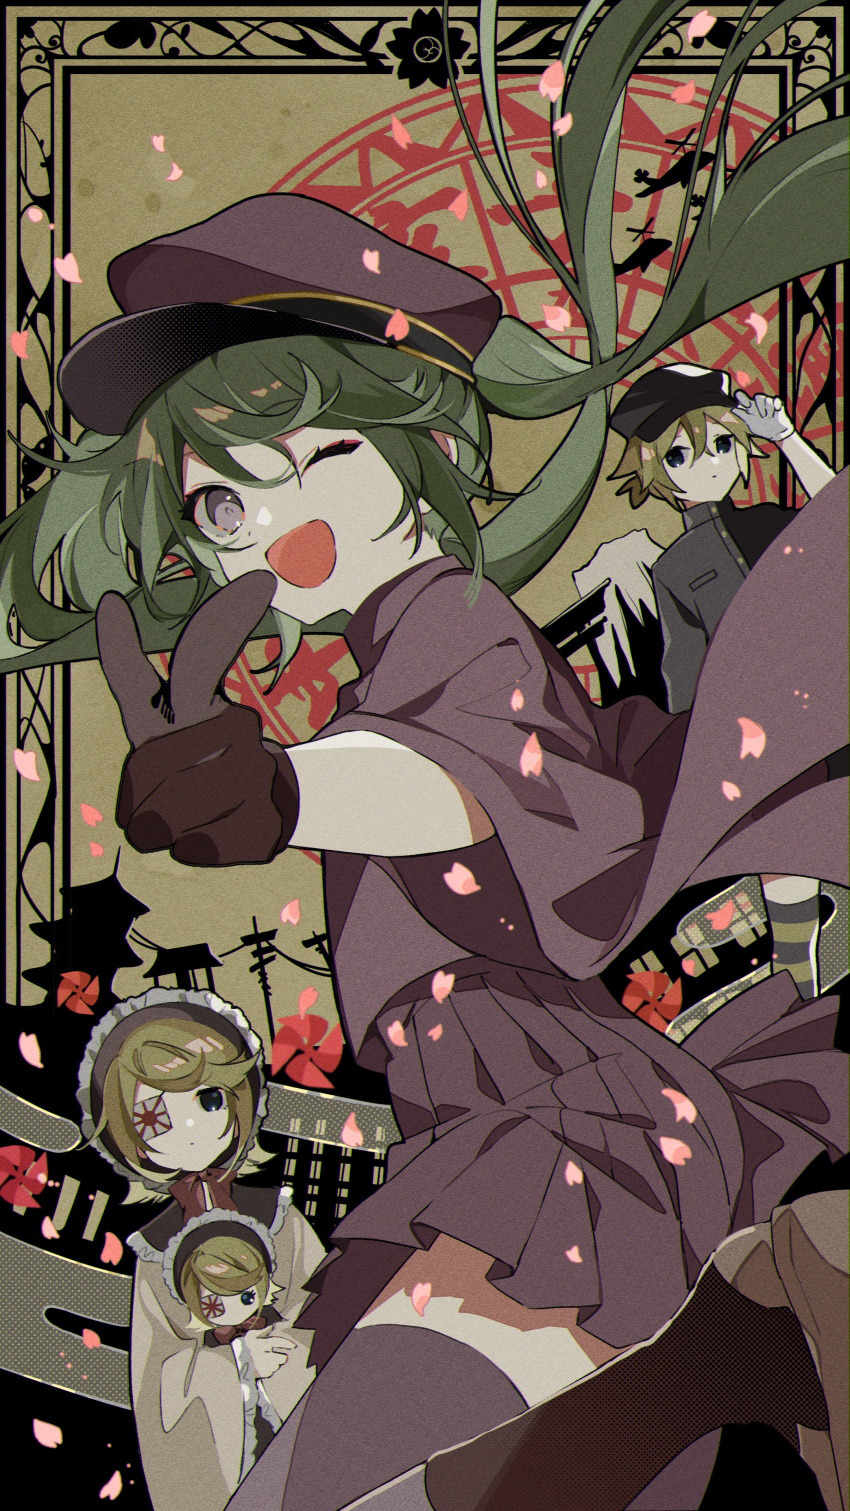 1boy 2girls absurdres bangs black_shirt blonde_hair blue_eyes character_doll cherry_blossoms commentary_request doll doll_hug dutch_angle eyebrows_visible_through_hair eyepatch film_grain frilled_hat frills from_side gloves green_hair hair_between_eyes hand_on_headwear hat hatsune_miku highres holding holding_doll kagamine_len kagamine_rin leg_up long_hair military military_hat military_uniform multiple_girls omutatsu one_eye_closed one_eye_covered open_mouth pinwheel pleated_skirt pointing pointing_at_viewer purple_gloves purple_headwear purple_legwear purple_shirt purple_skirt red_neckwear senbon-zakura_(vocaloid) shadow shiny shiny_hair shirt short_hair skirt striped striped_legwear swept_bangs thigh-highs uniform violet_eyes vocaloid wide_sleeves zettai_ryouiki